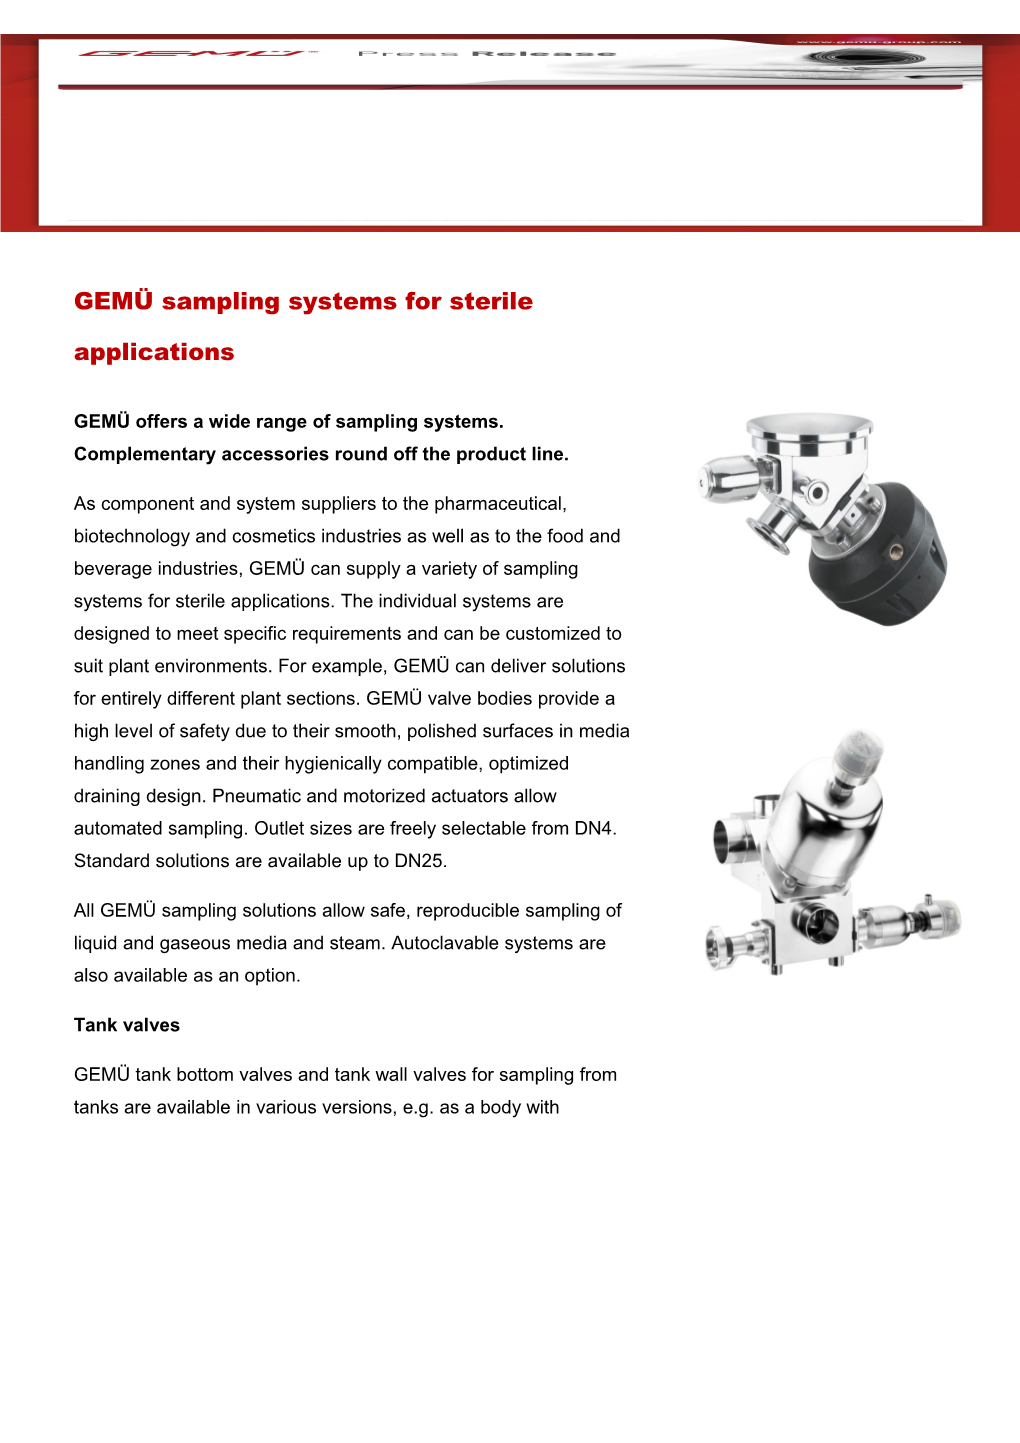 GEMÜ Offers a Wide Range of Sampling Systems. Complementary Accessories Round Off The